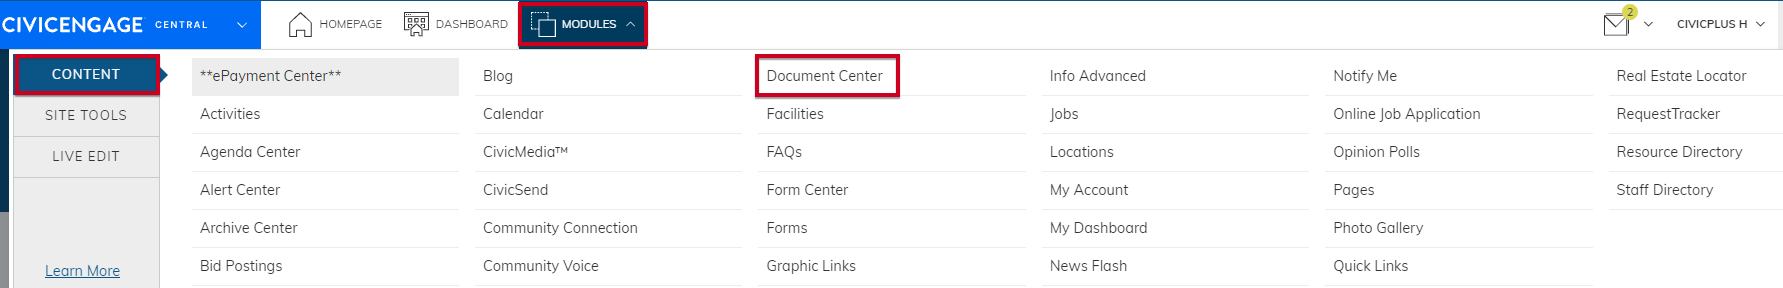 Navigate from Modules to Content then to Document Center